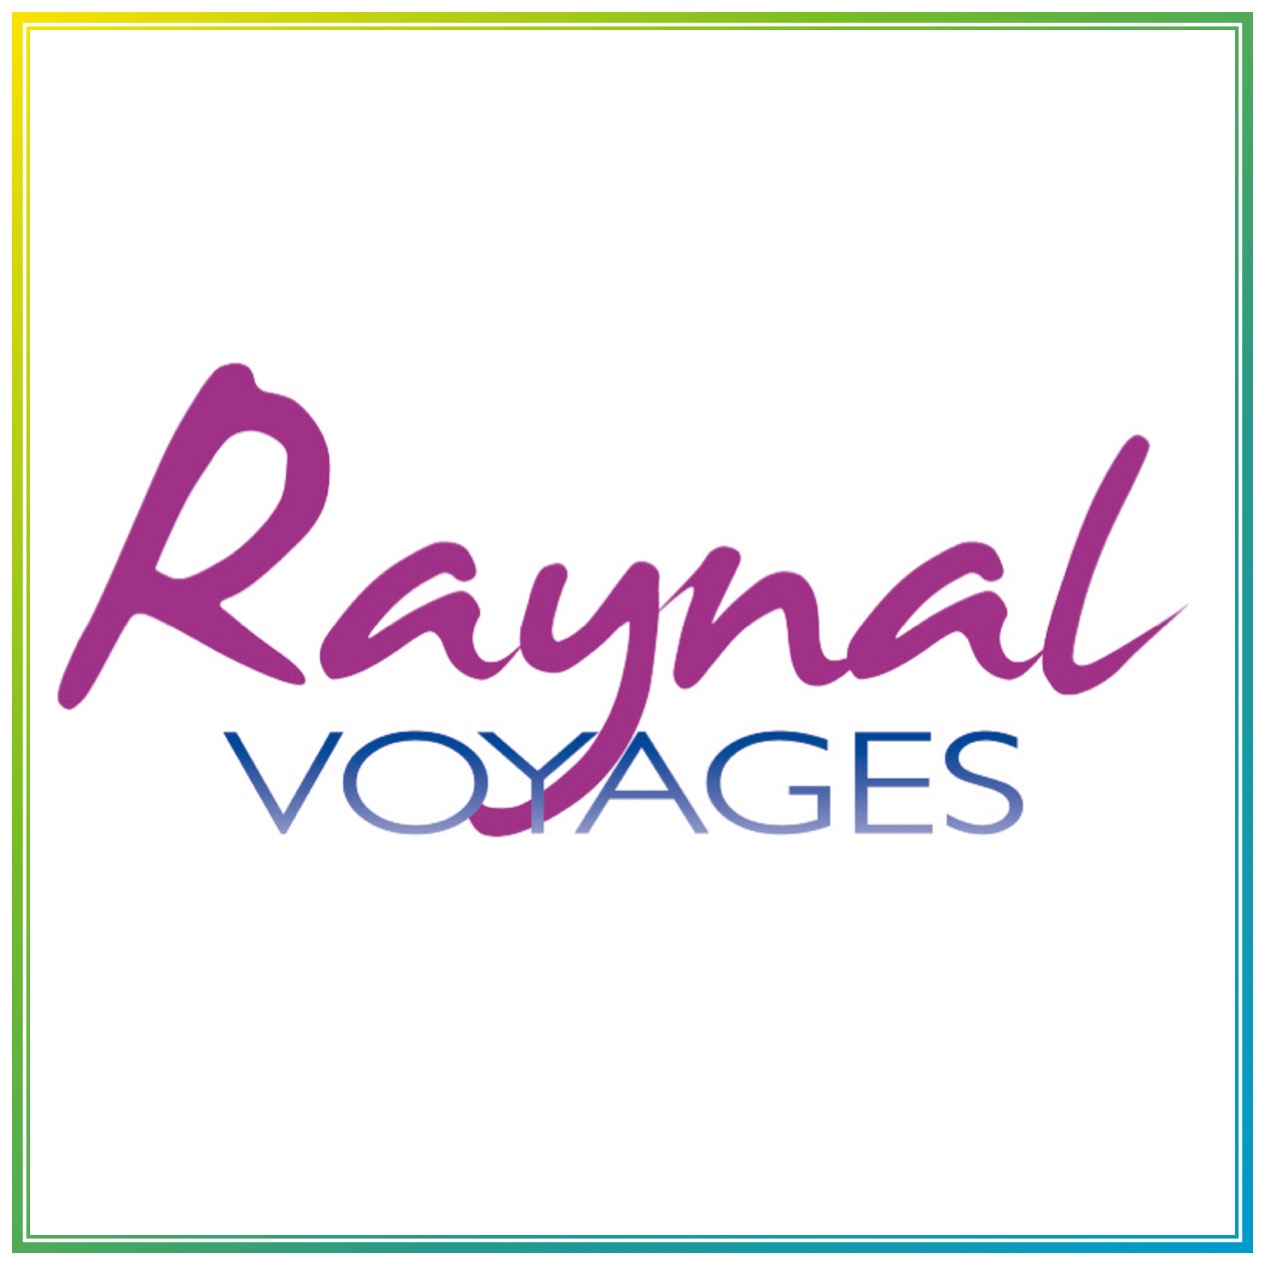 Raynal Voyages